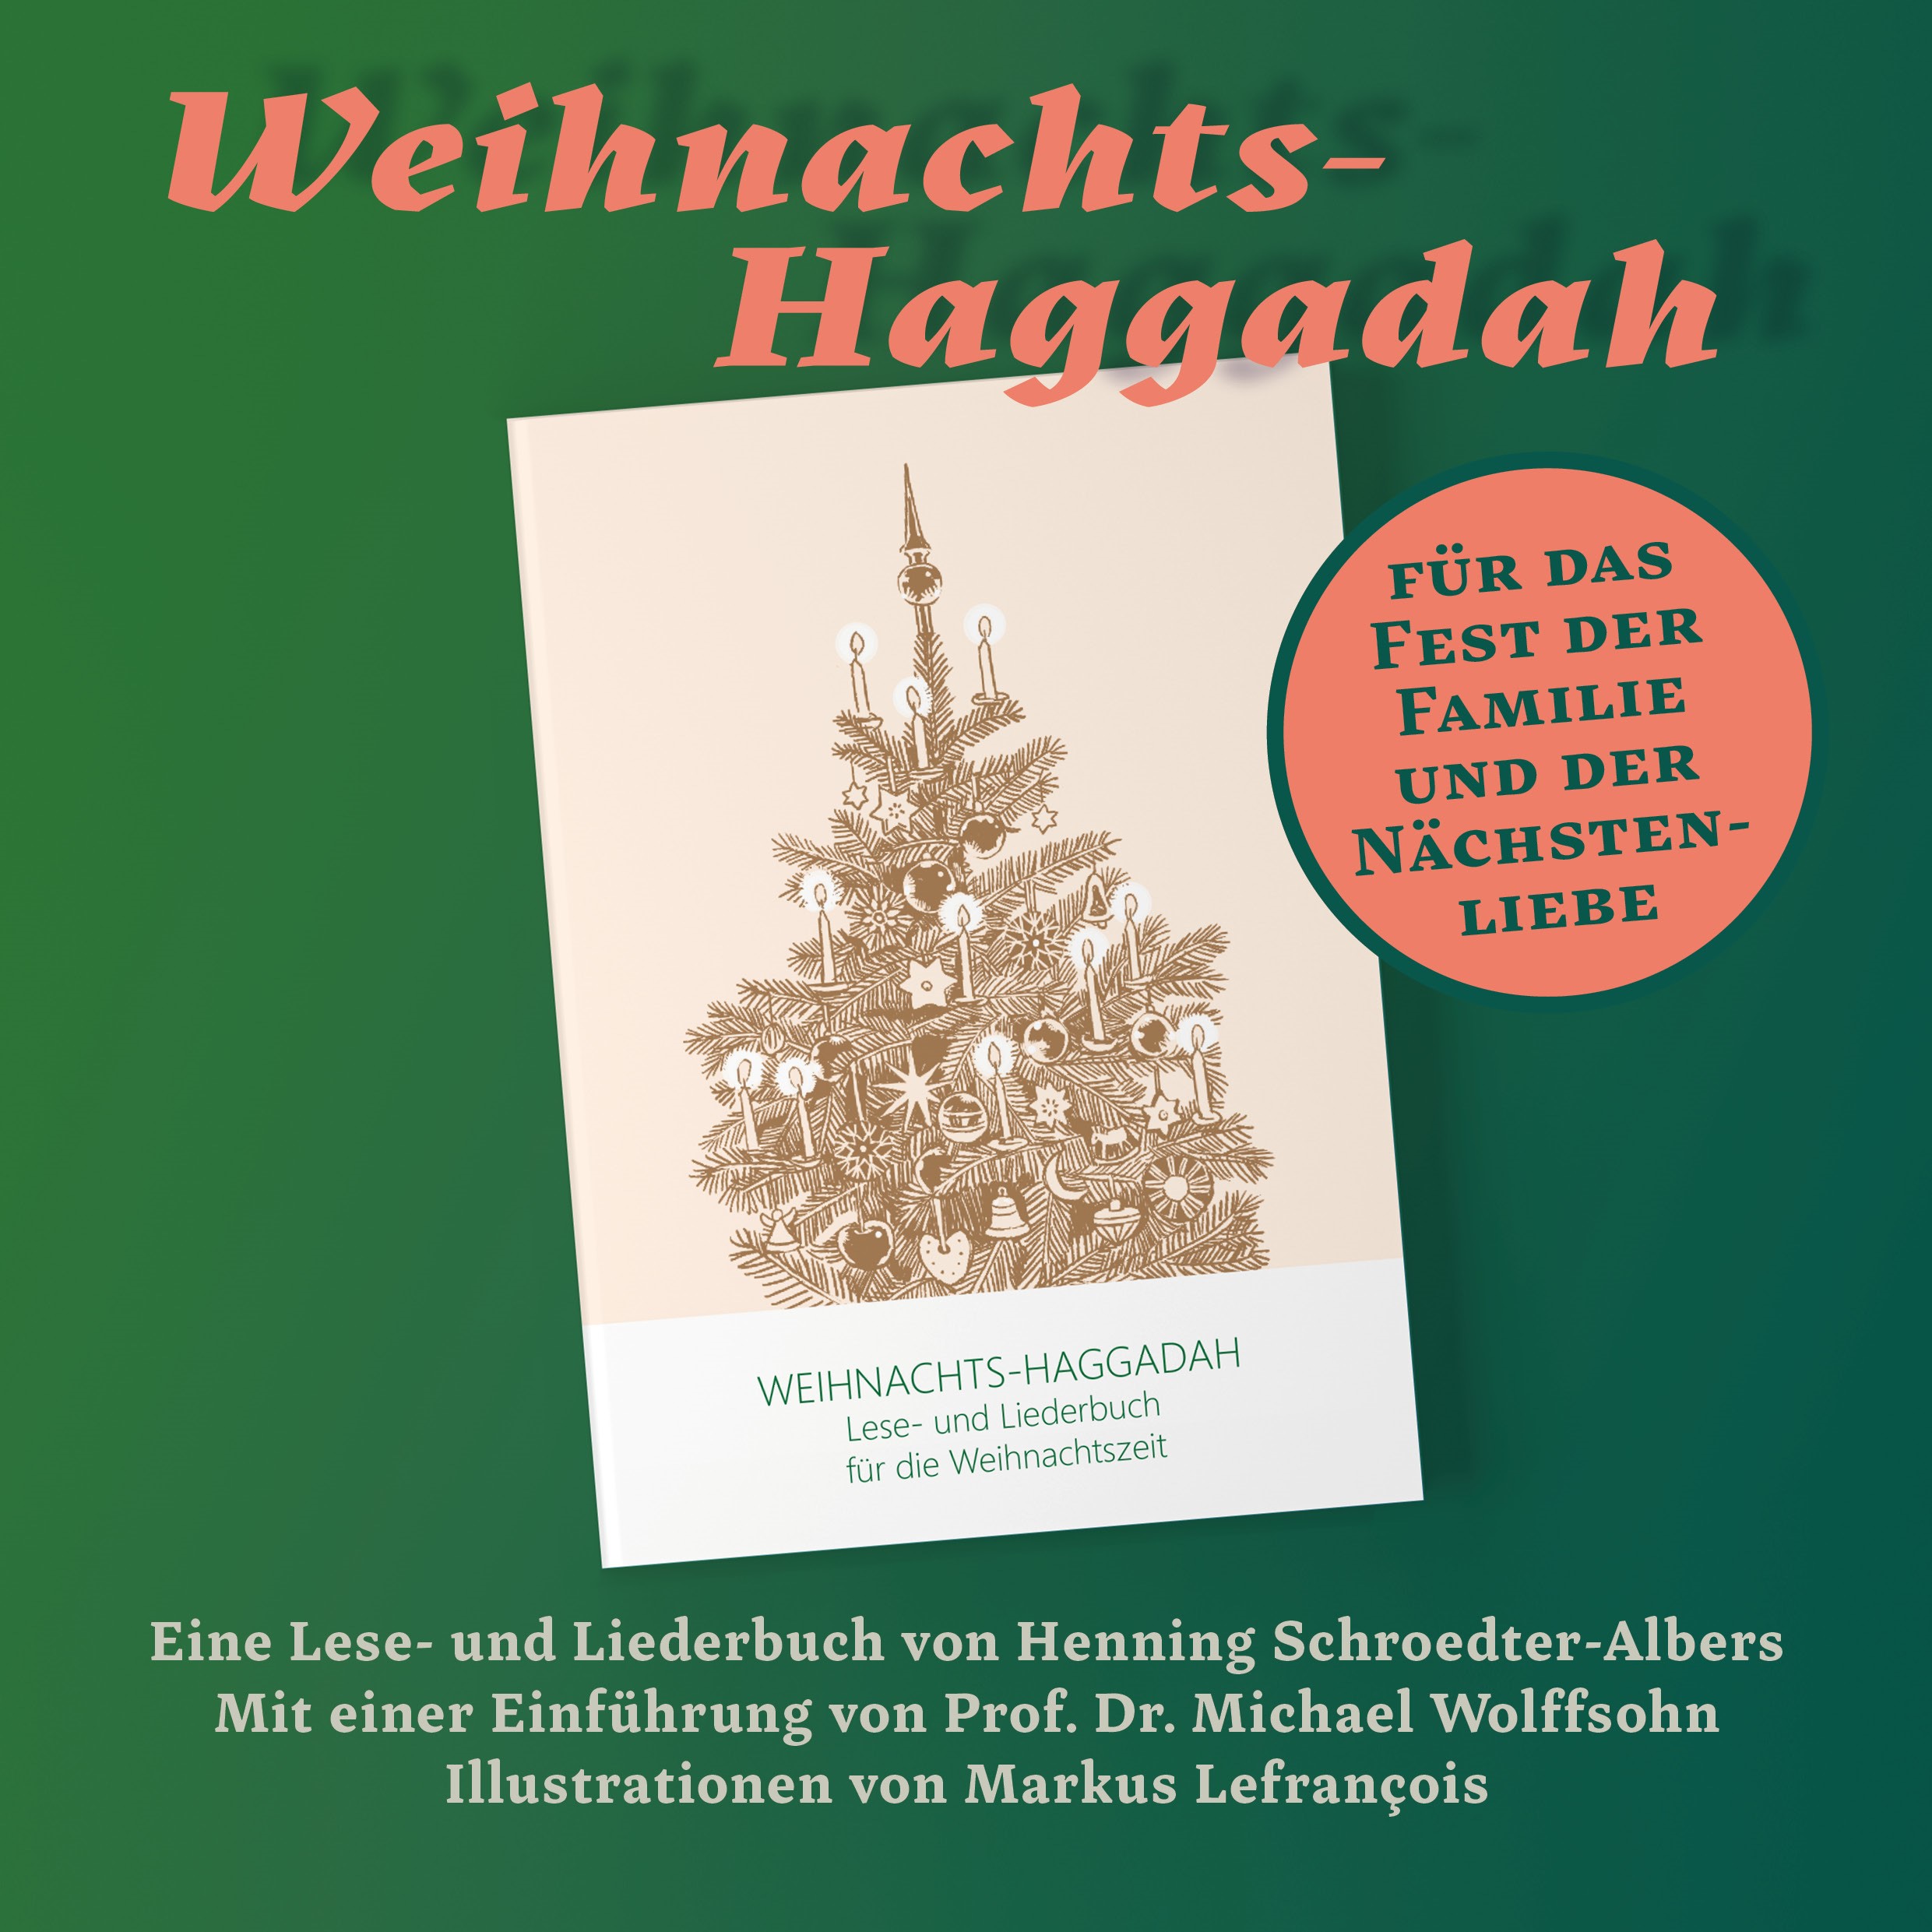 Weihnachts-Haggadah (Cover)